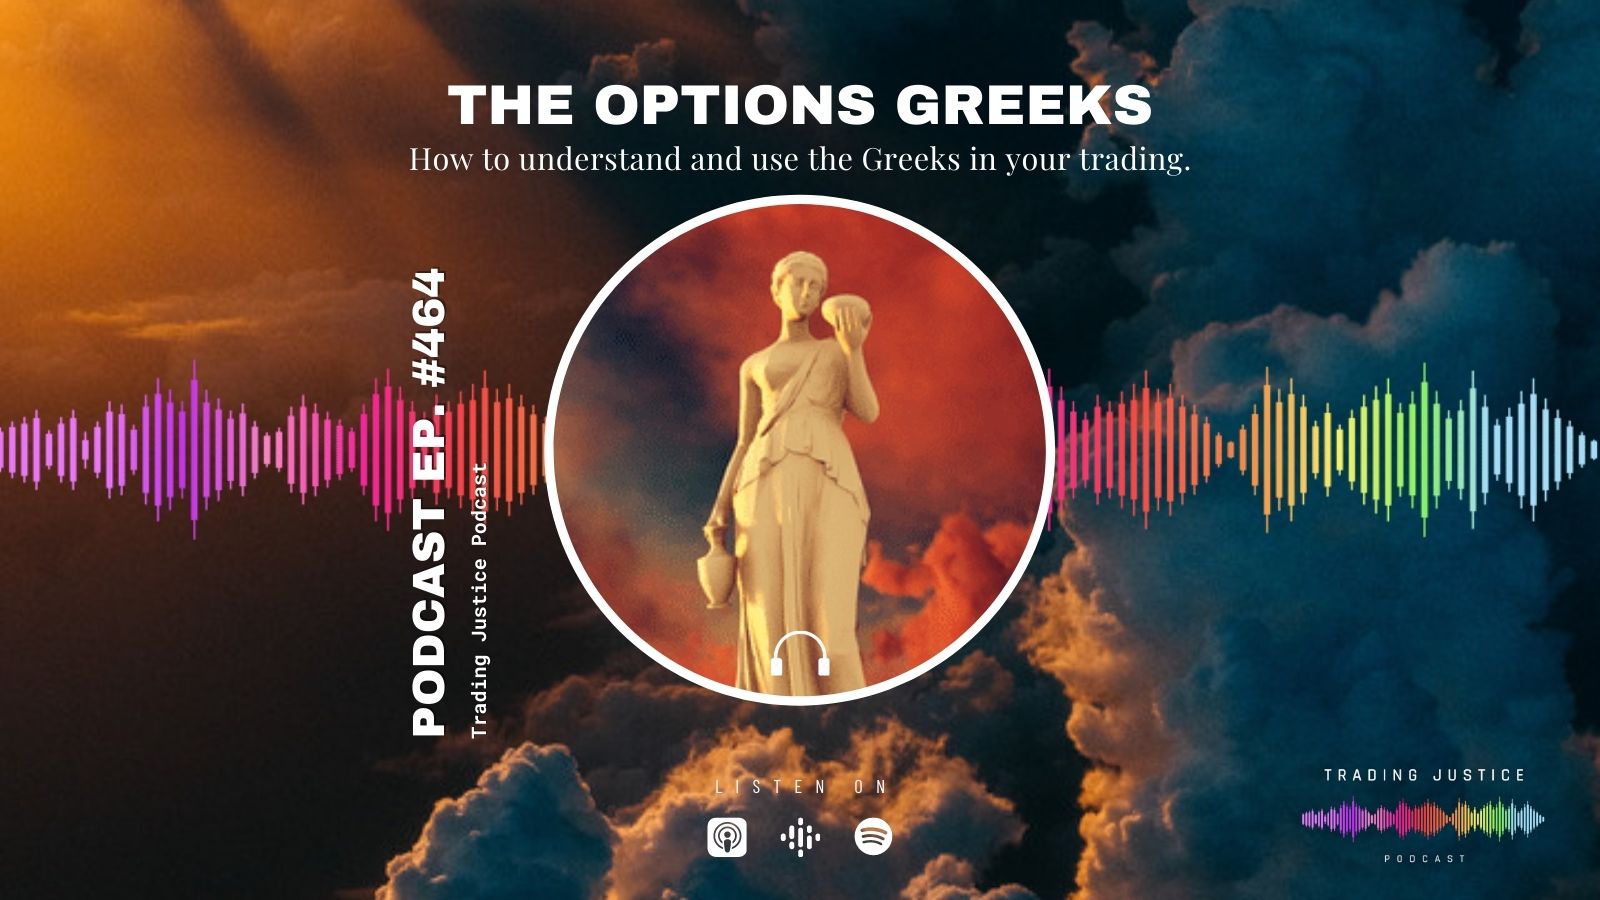 Trading Justice 464: The Options Greeks